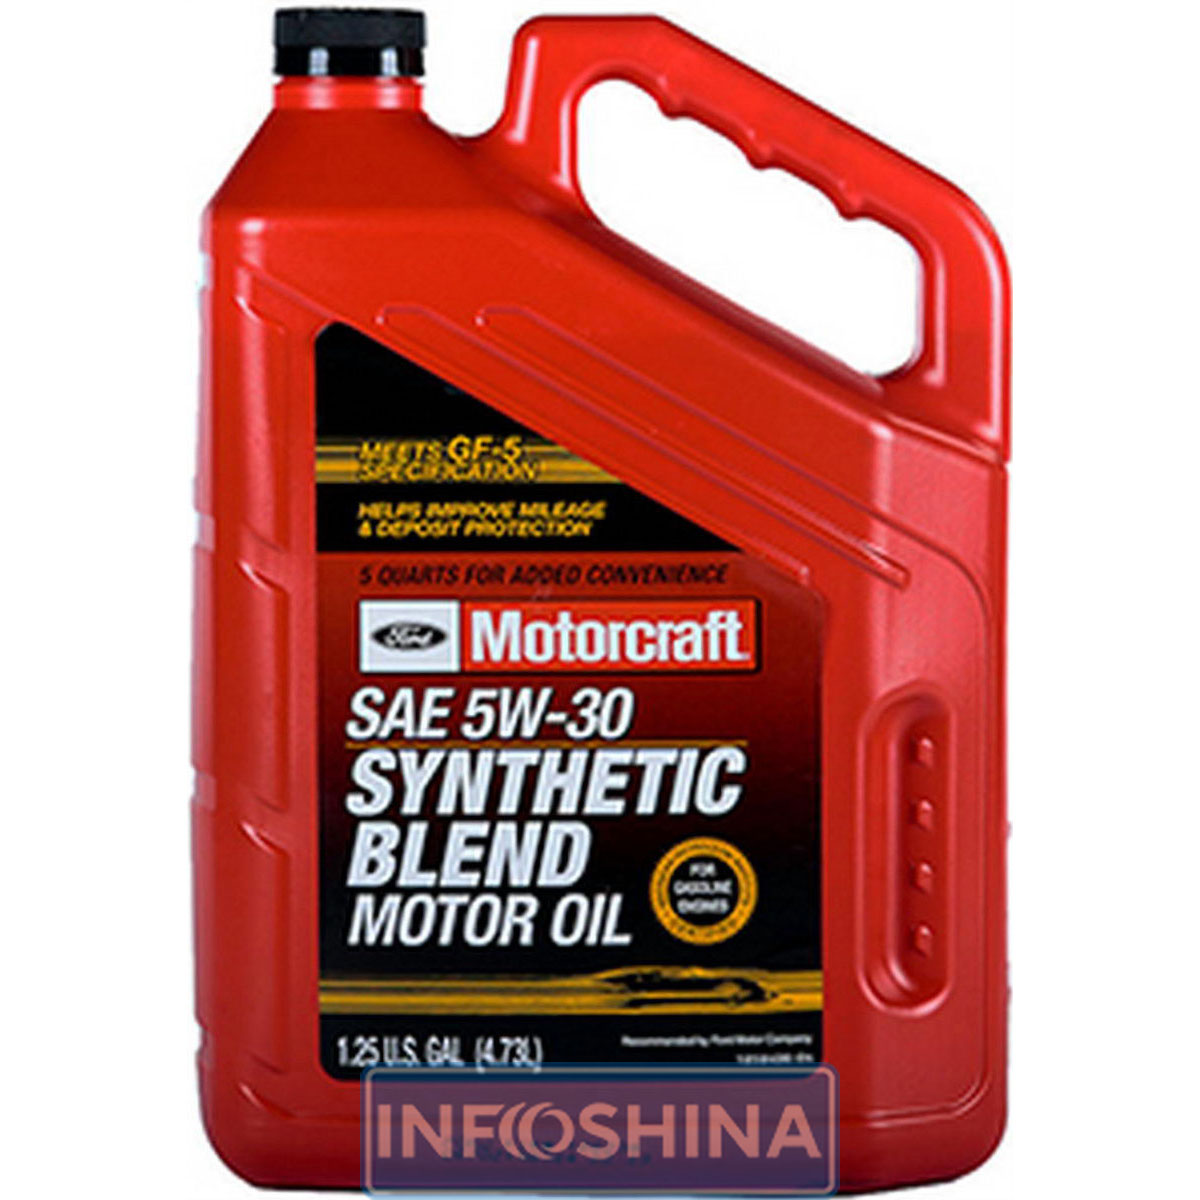 Купити масло Ford Motorcraft Synthetic Blend 5W-30 (5 л)